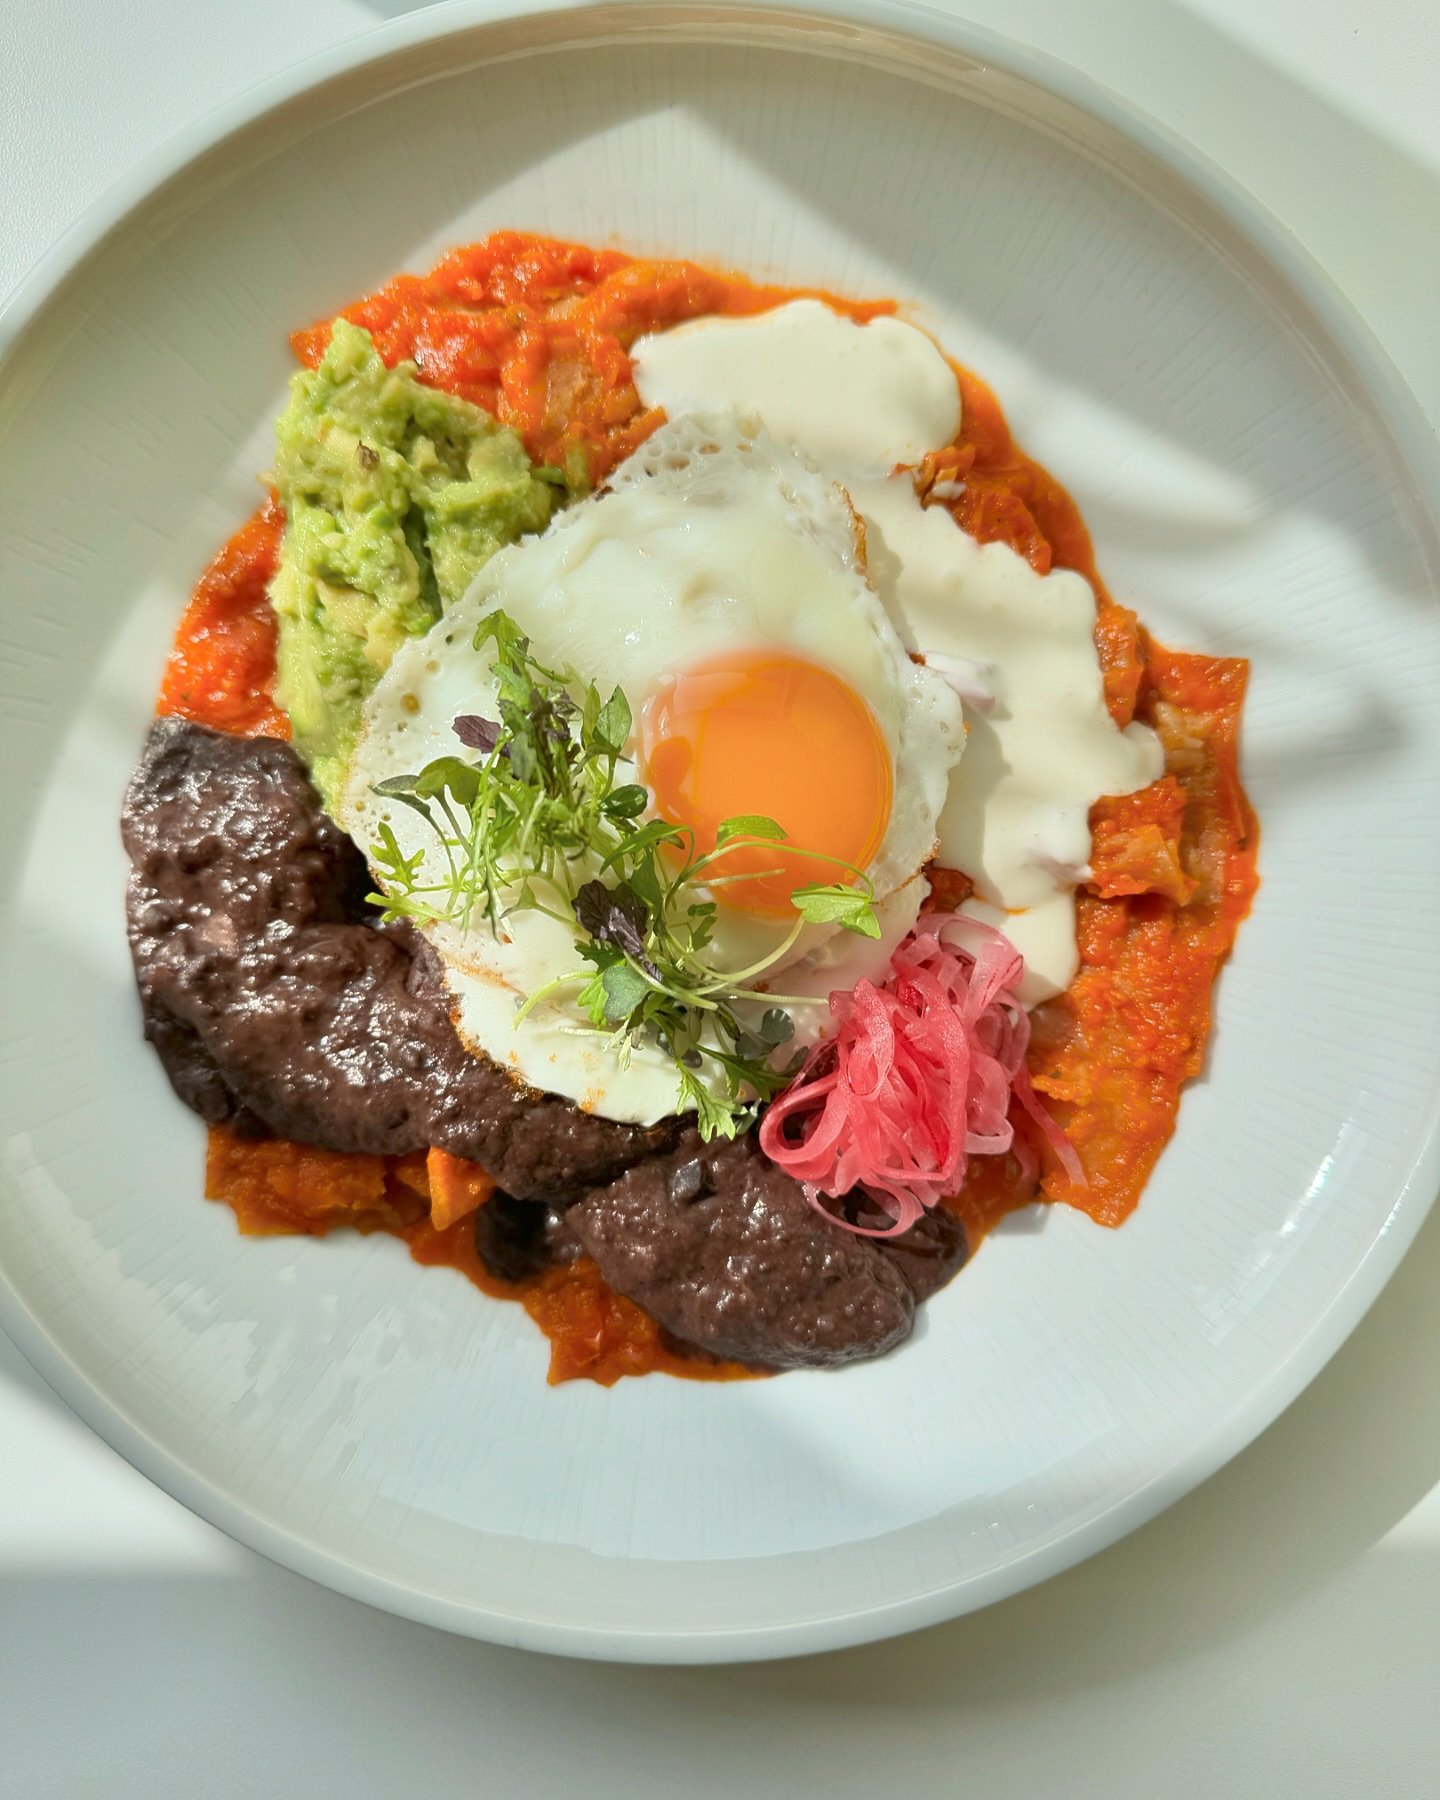 What a crazy bank holiday weekend! We are so happy to be back and with @krahsnori cooking for everyone 🥰 

📸 Chilaquiles - salsa roja tossed tortillas, black beans, avocado, crema, fried eggs, habanero hot sauce and pickled onions 🍳 🥑